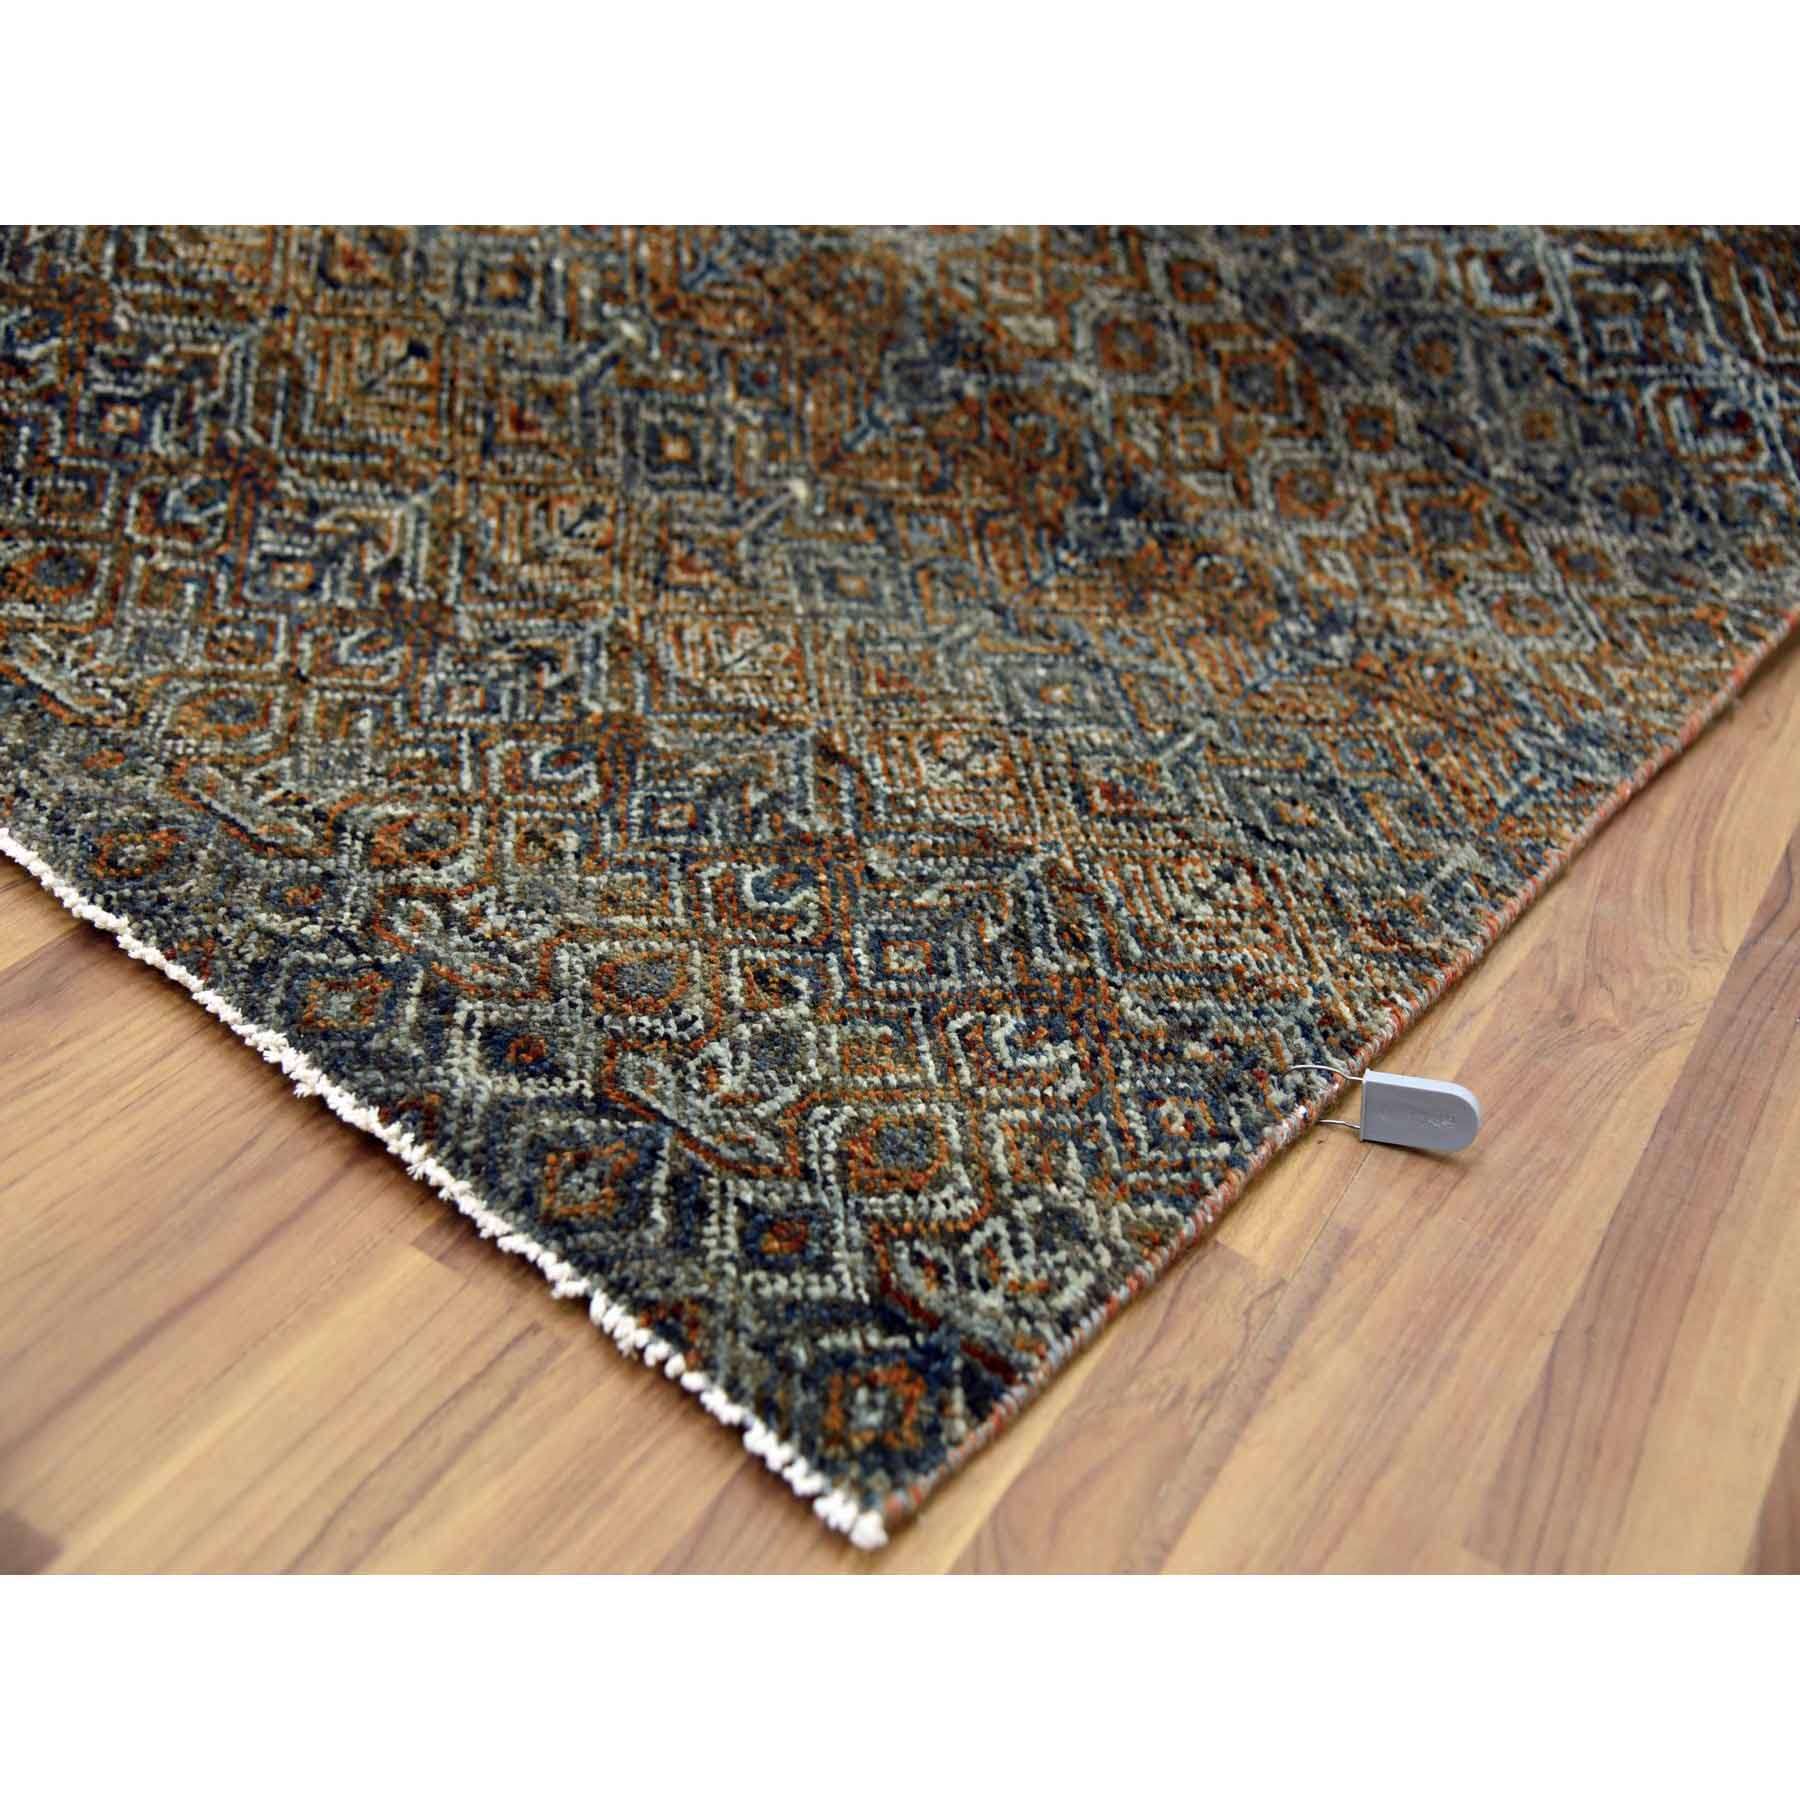 Modern-and-Contemporary-Hand-Knotted-Rug-396835